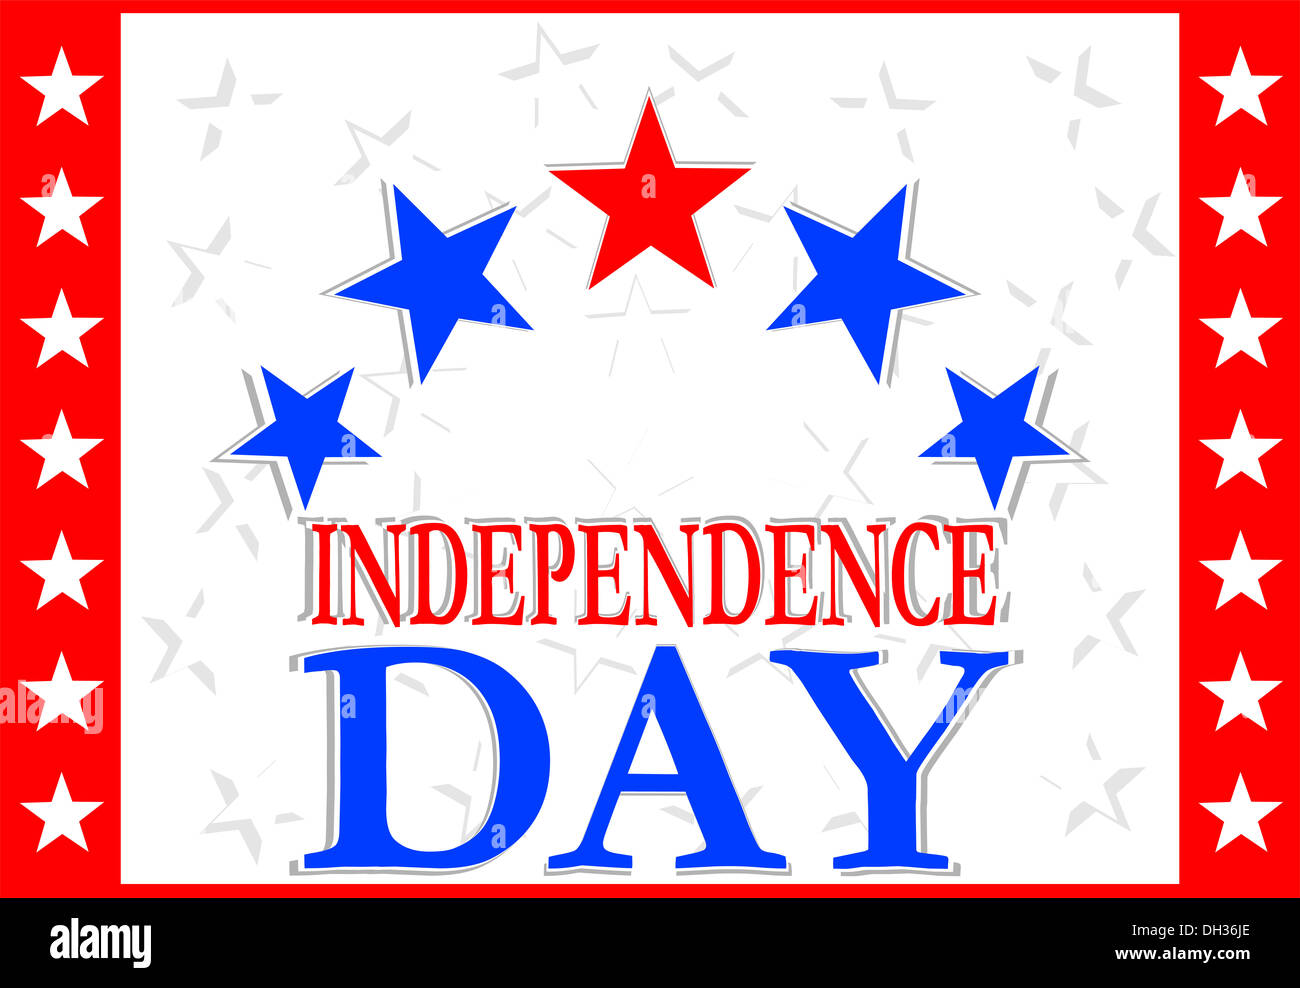 Independence Day-Design Stockfoto